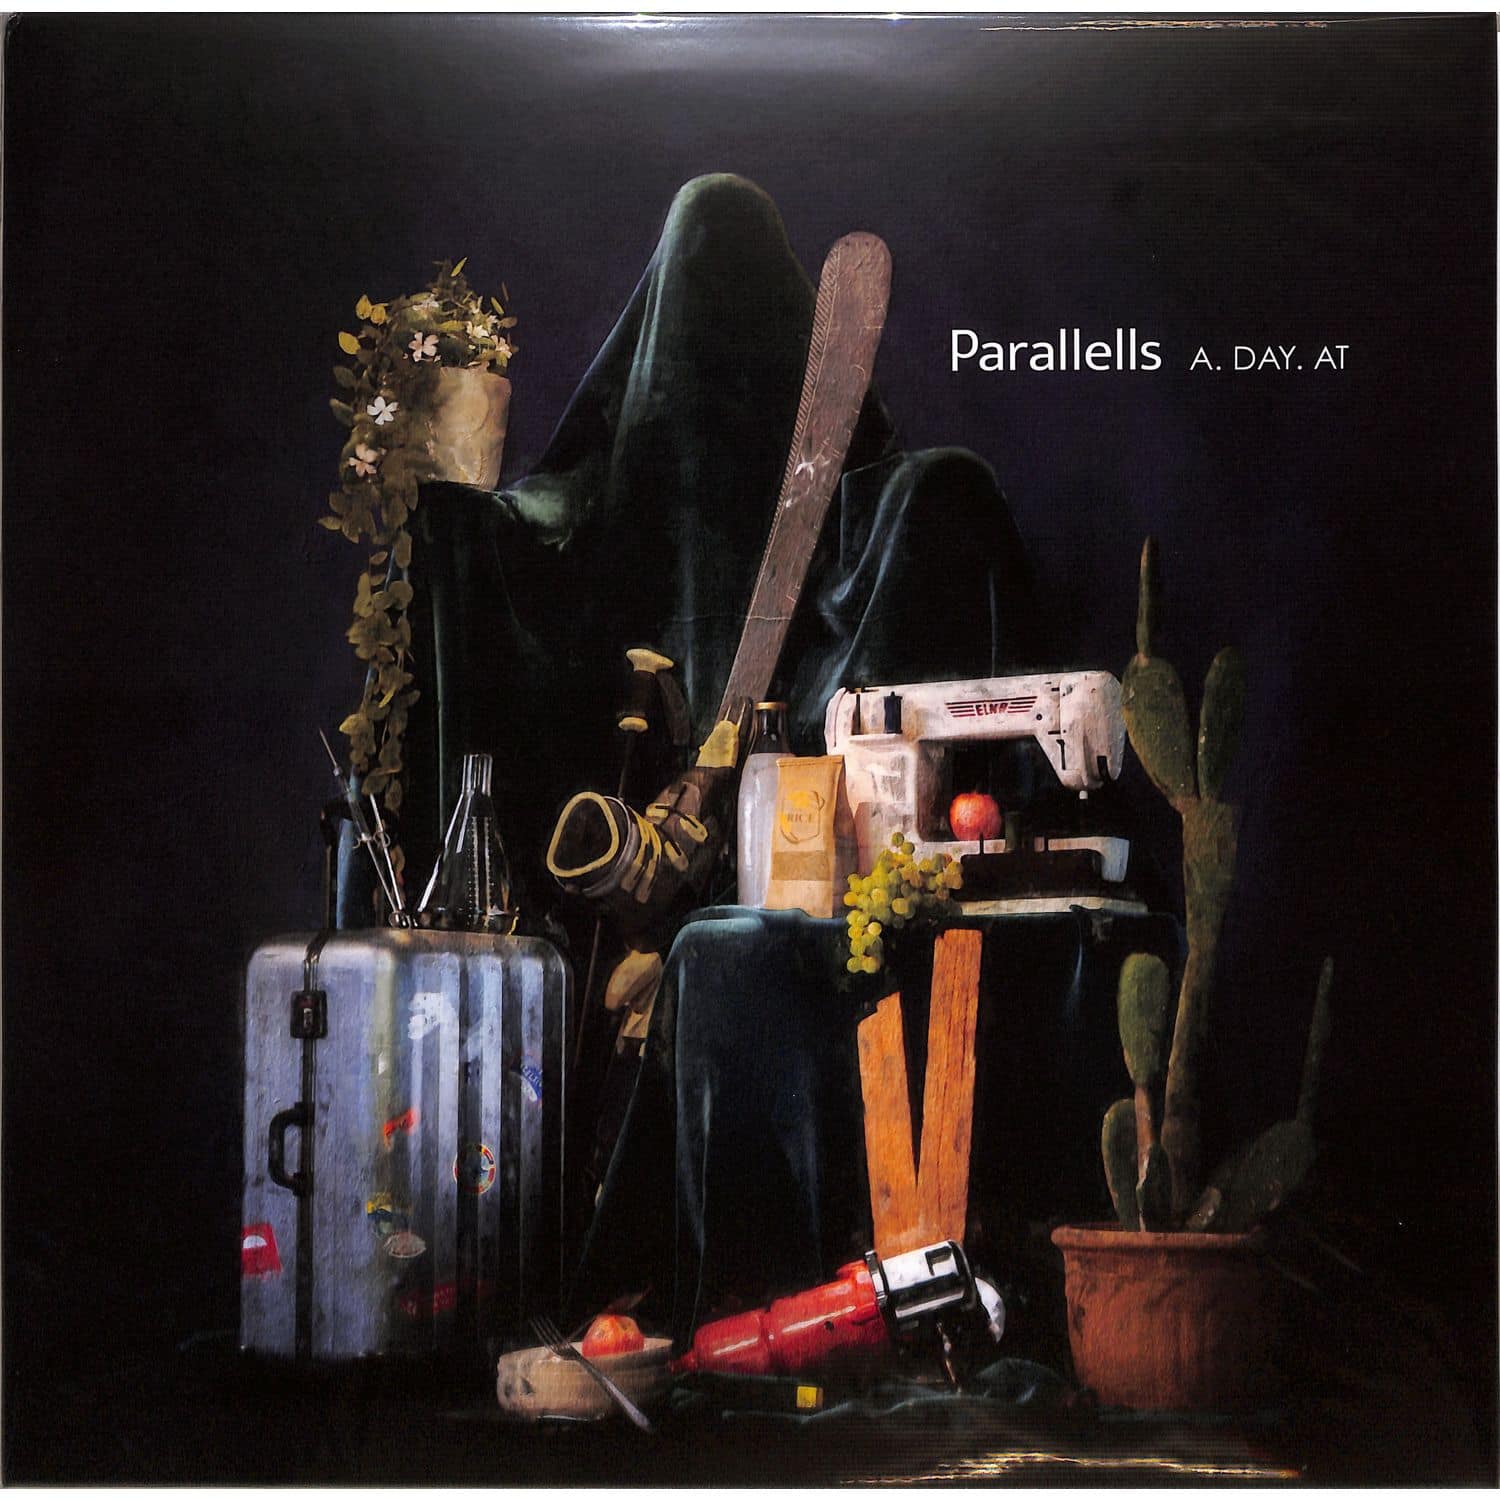 Parallells - A DAY AT 